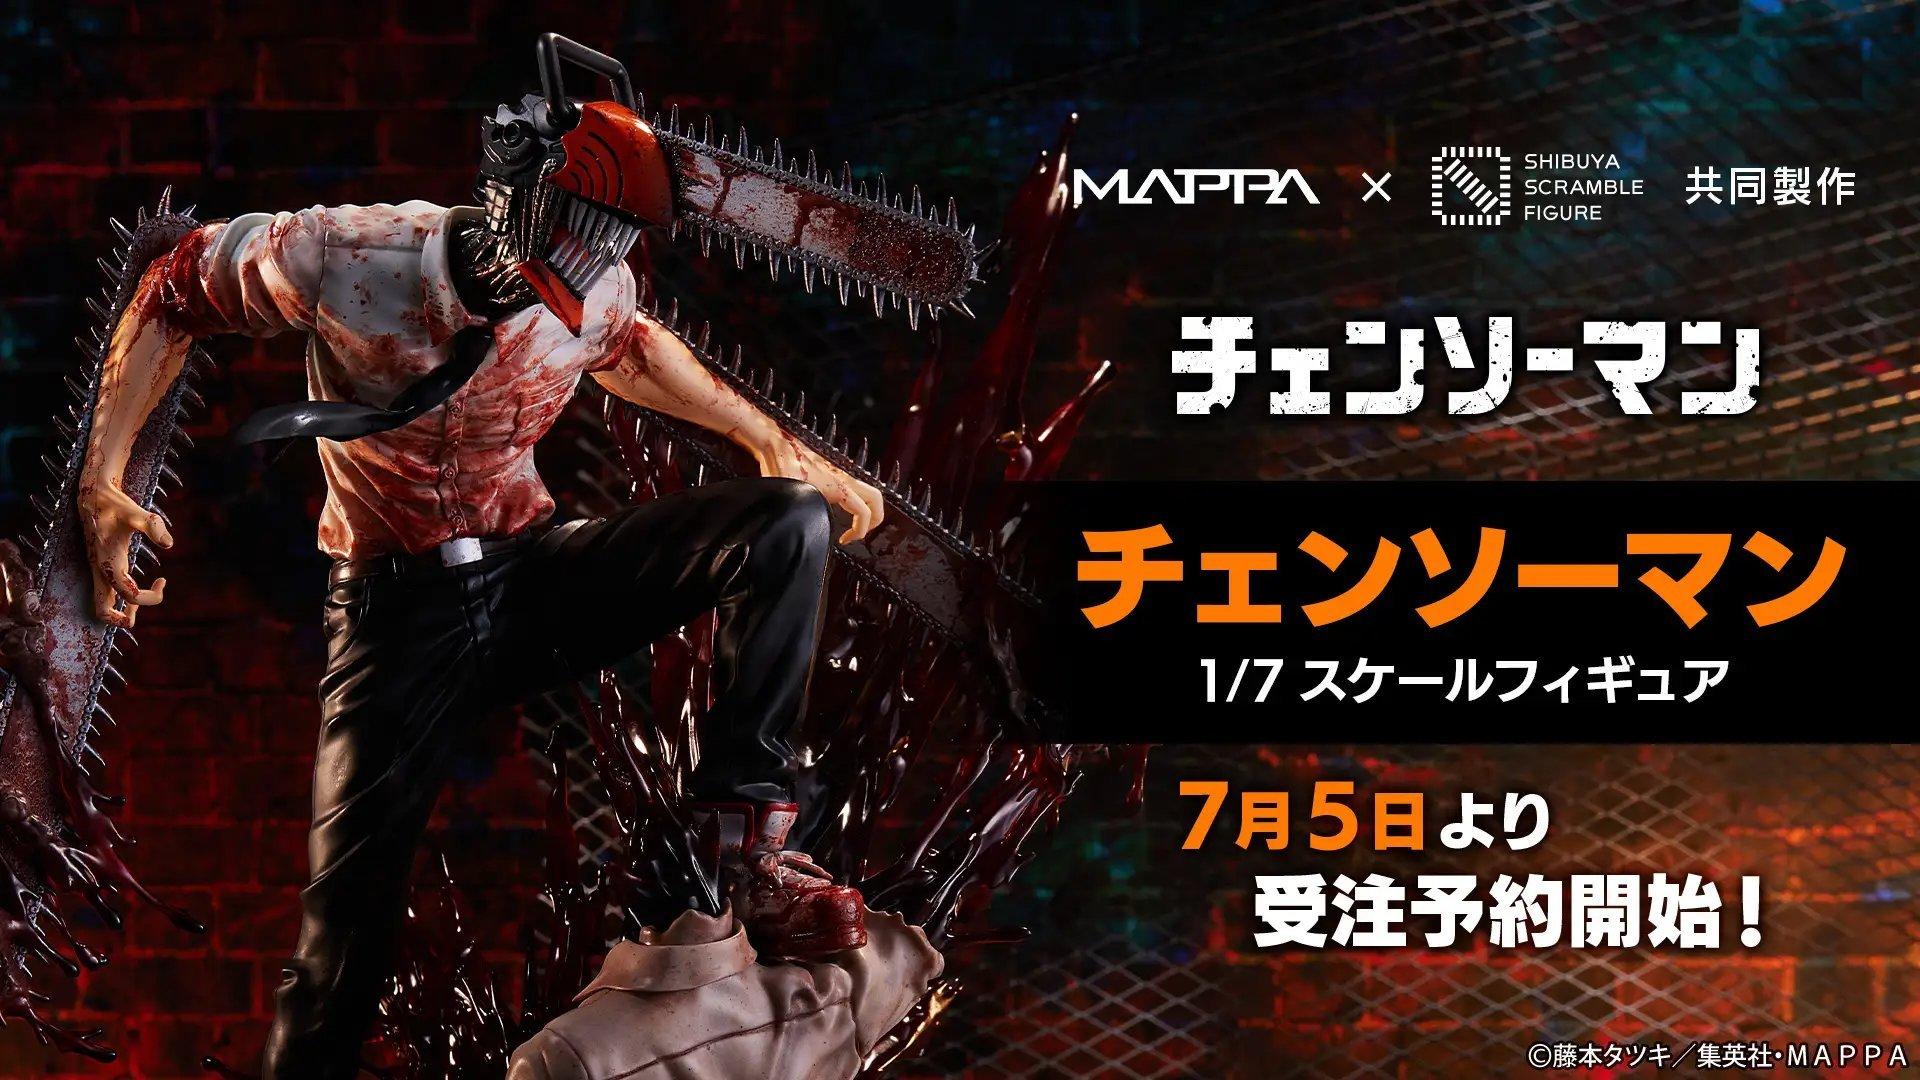 Chainsaw Man Statue Lets The Blood Flow With Power & Meowy